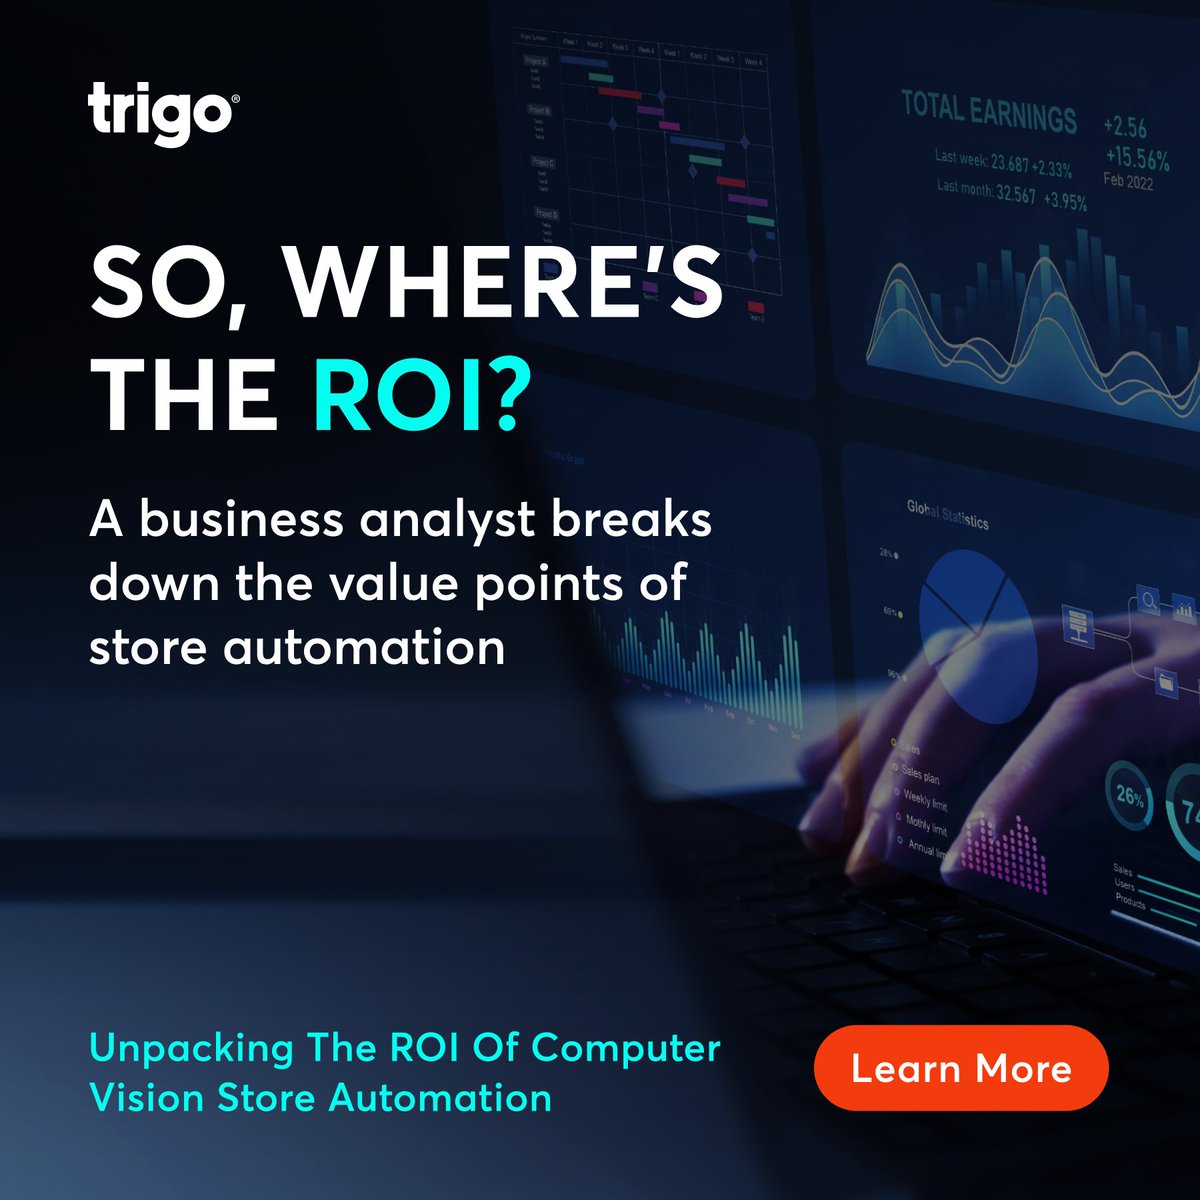 Retailer? Ever questioned where the ROI of autonomous store transformation comes from? Our business analyst breaks down how and when retailers achieve ROI with computer vision smart store tech, and YES, it's much more than labor cost reduction. Click here: bit.ly/49CdtpO